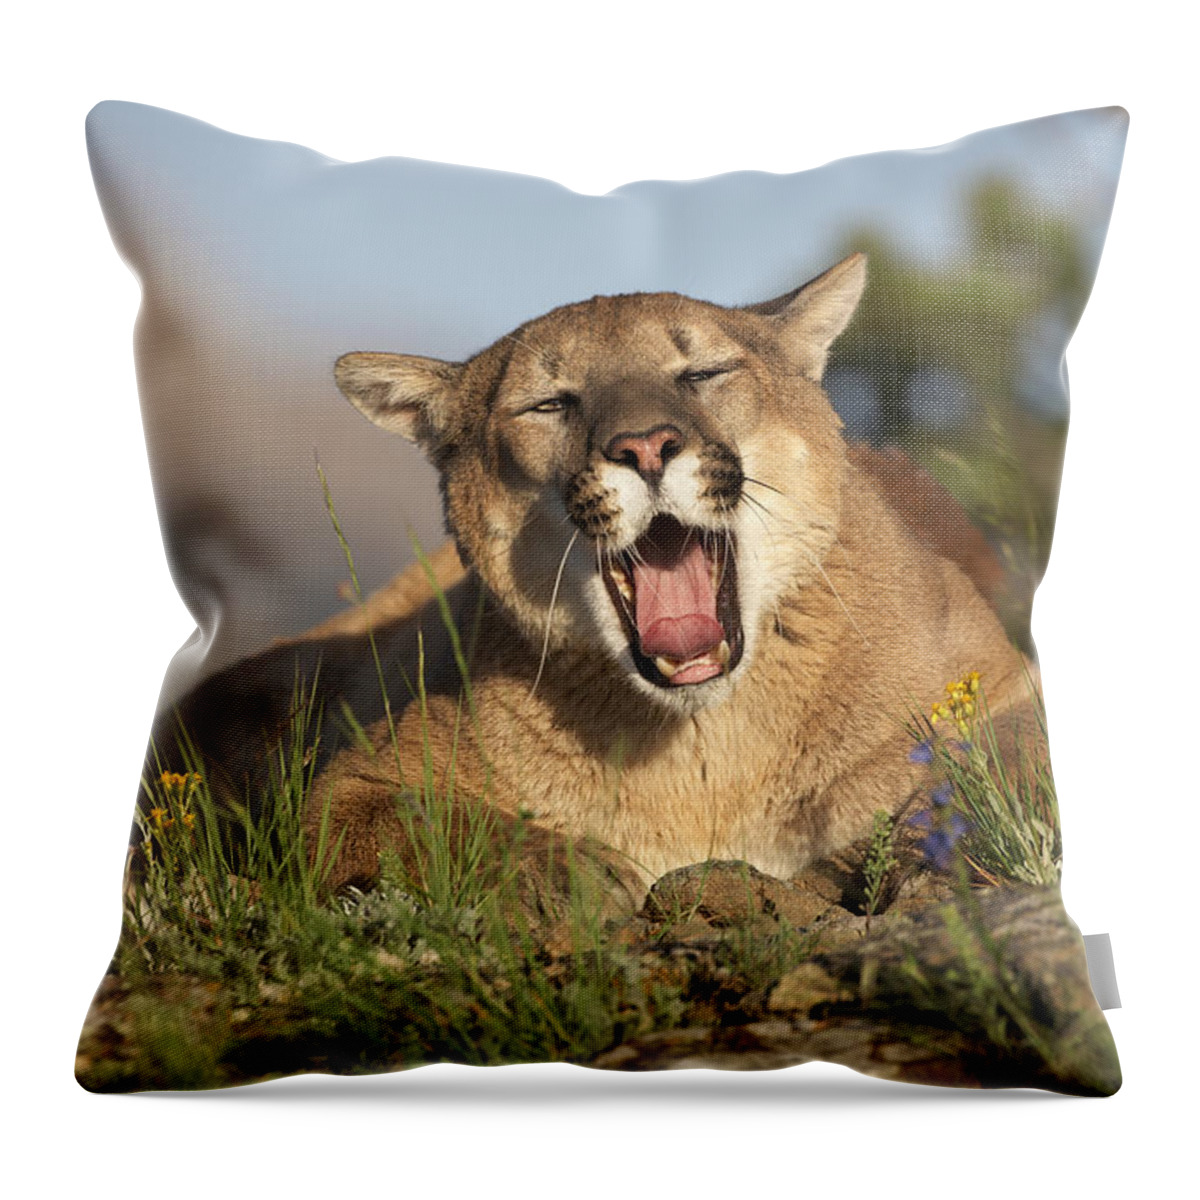 Mp Throw Pillow featuring the photograph Mountain Lion Puma Concolor Yawning by Tim Fitzharris